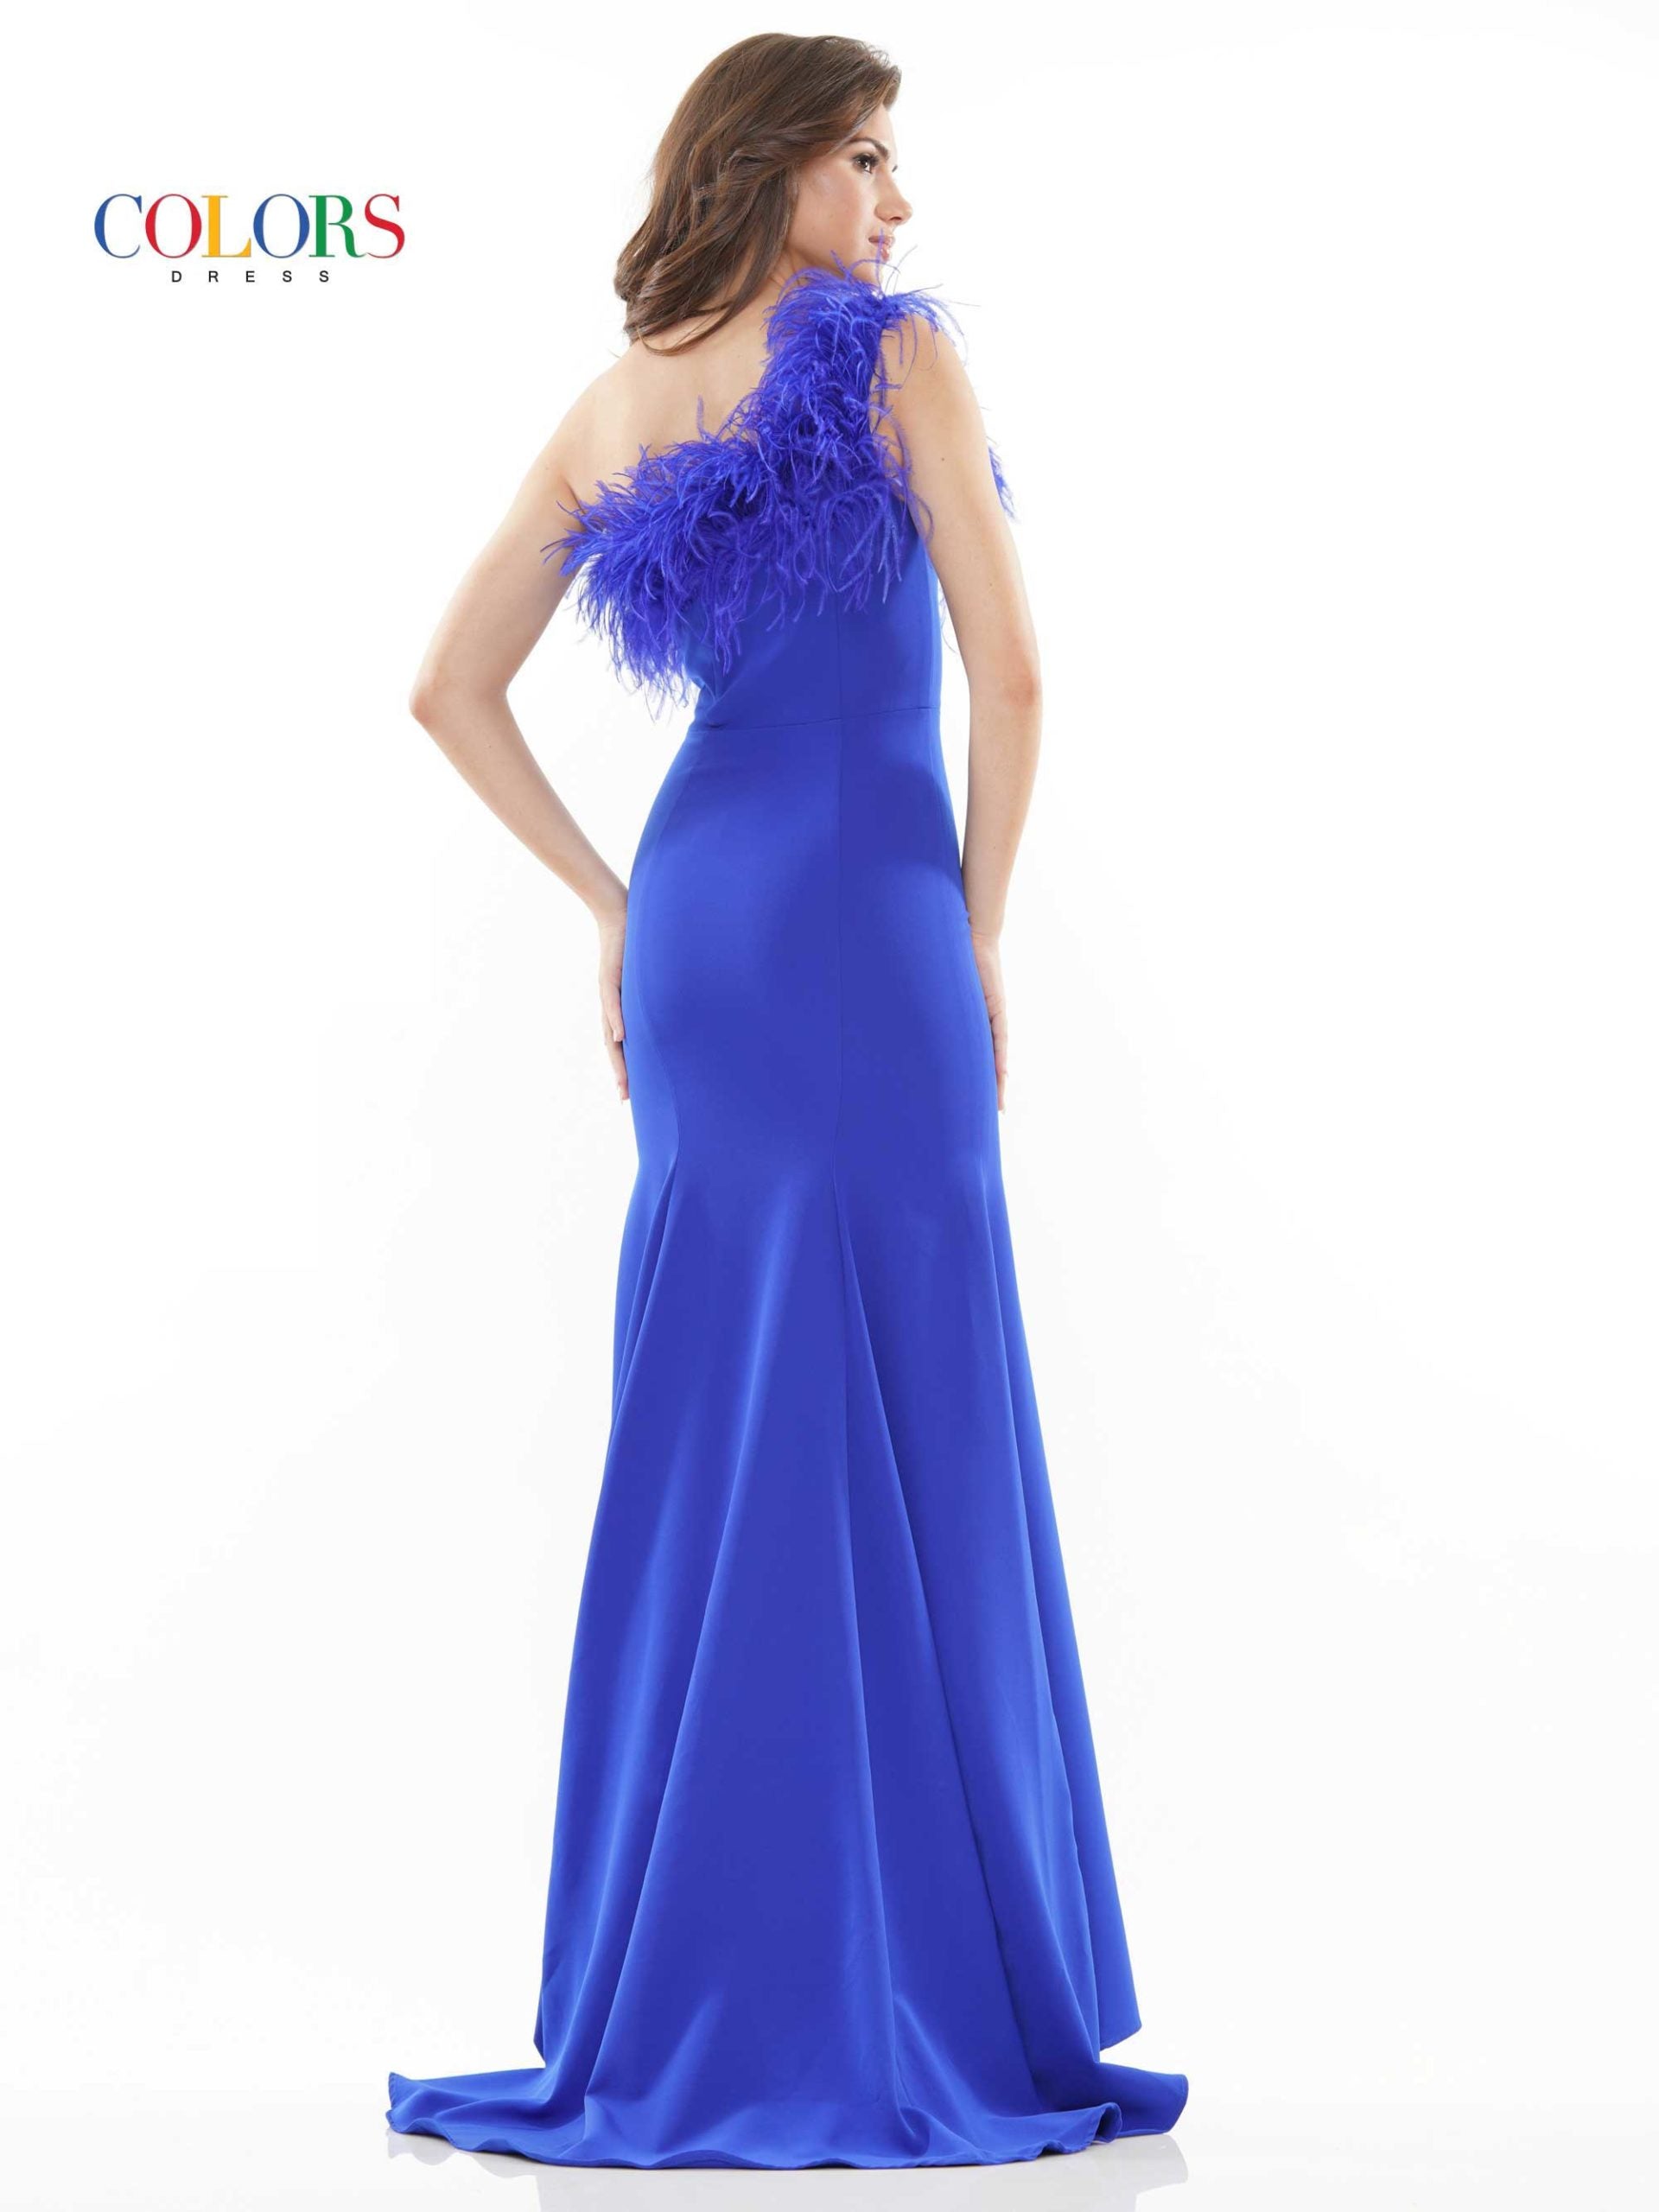 Colors Dress 2405 Fitted One Shoulder Feather Embellished Prom Dress Slit Gown 47″ one shoulder fit and flare crepe dress with ostrich feathers along the neckline, front slit  Available Sizes: 0-22  Available Colors: Black, Light Blue, Off White, Royal, Hot Pink